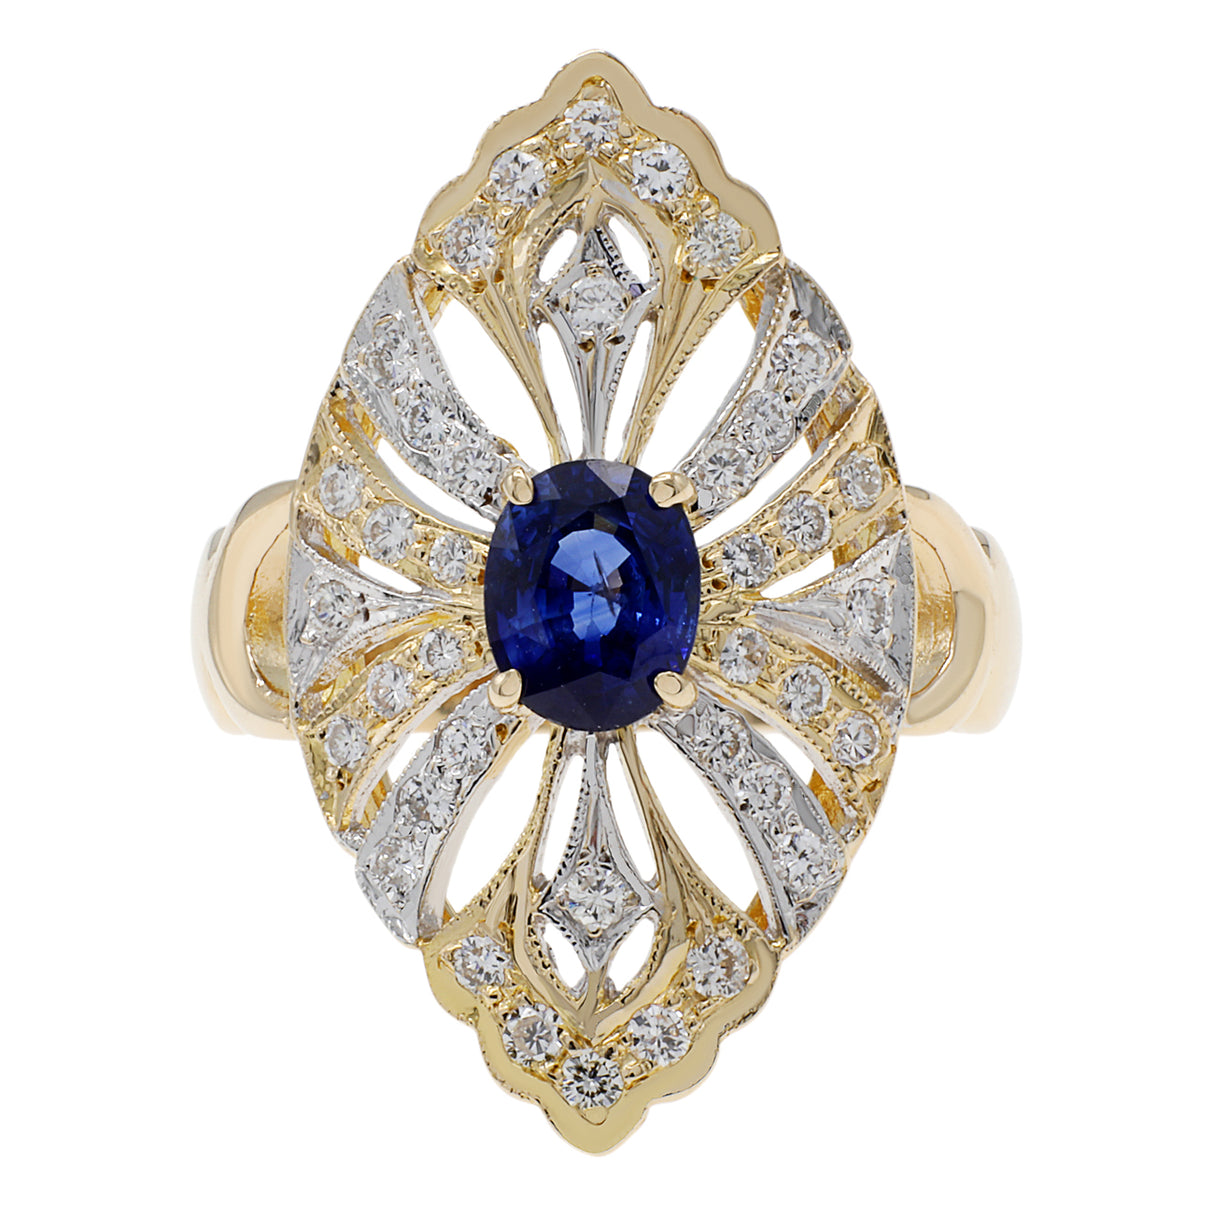 14K Yellow Gold 0.83 Carat Oval Sapphire Ring